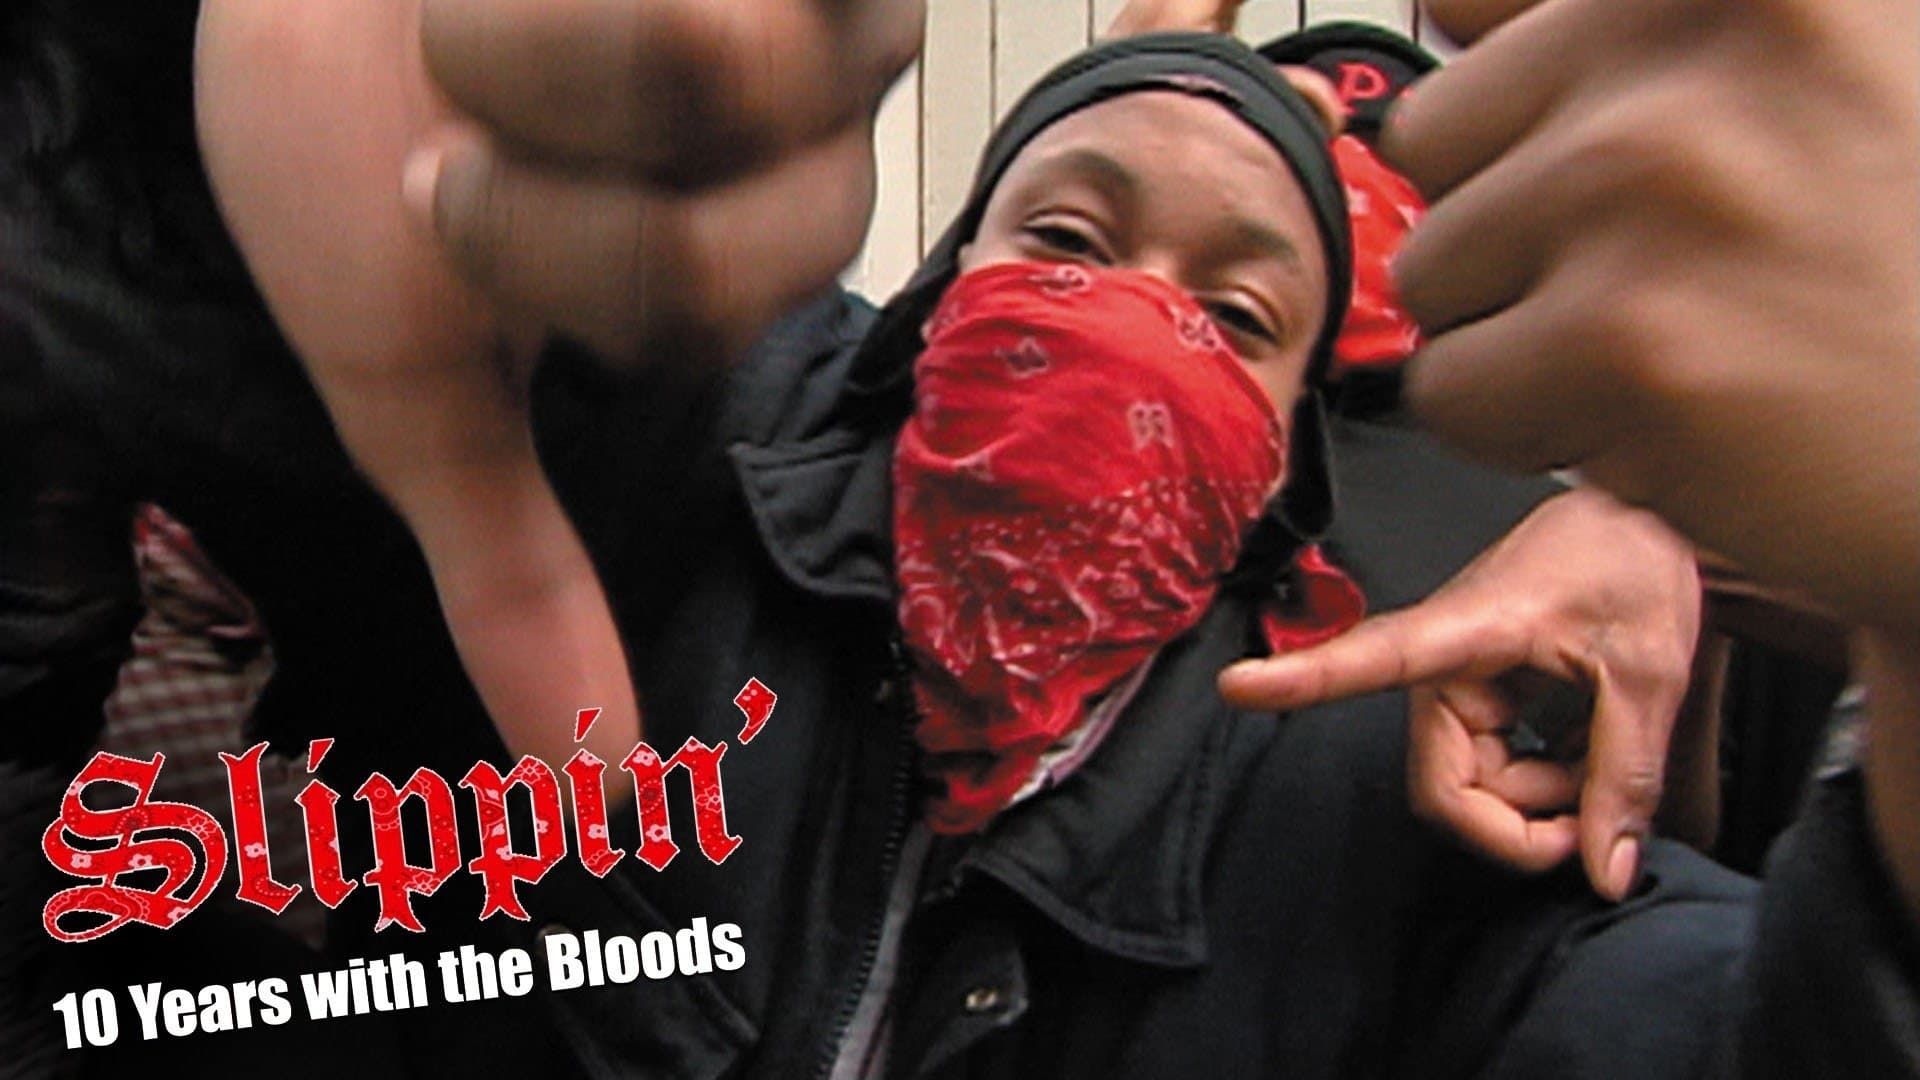 Slippin': Ten Years with the Bloods background